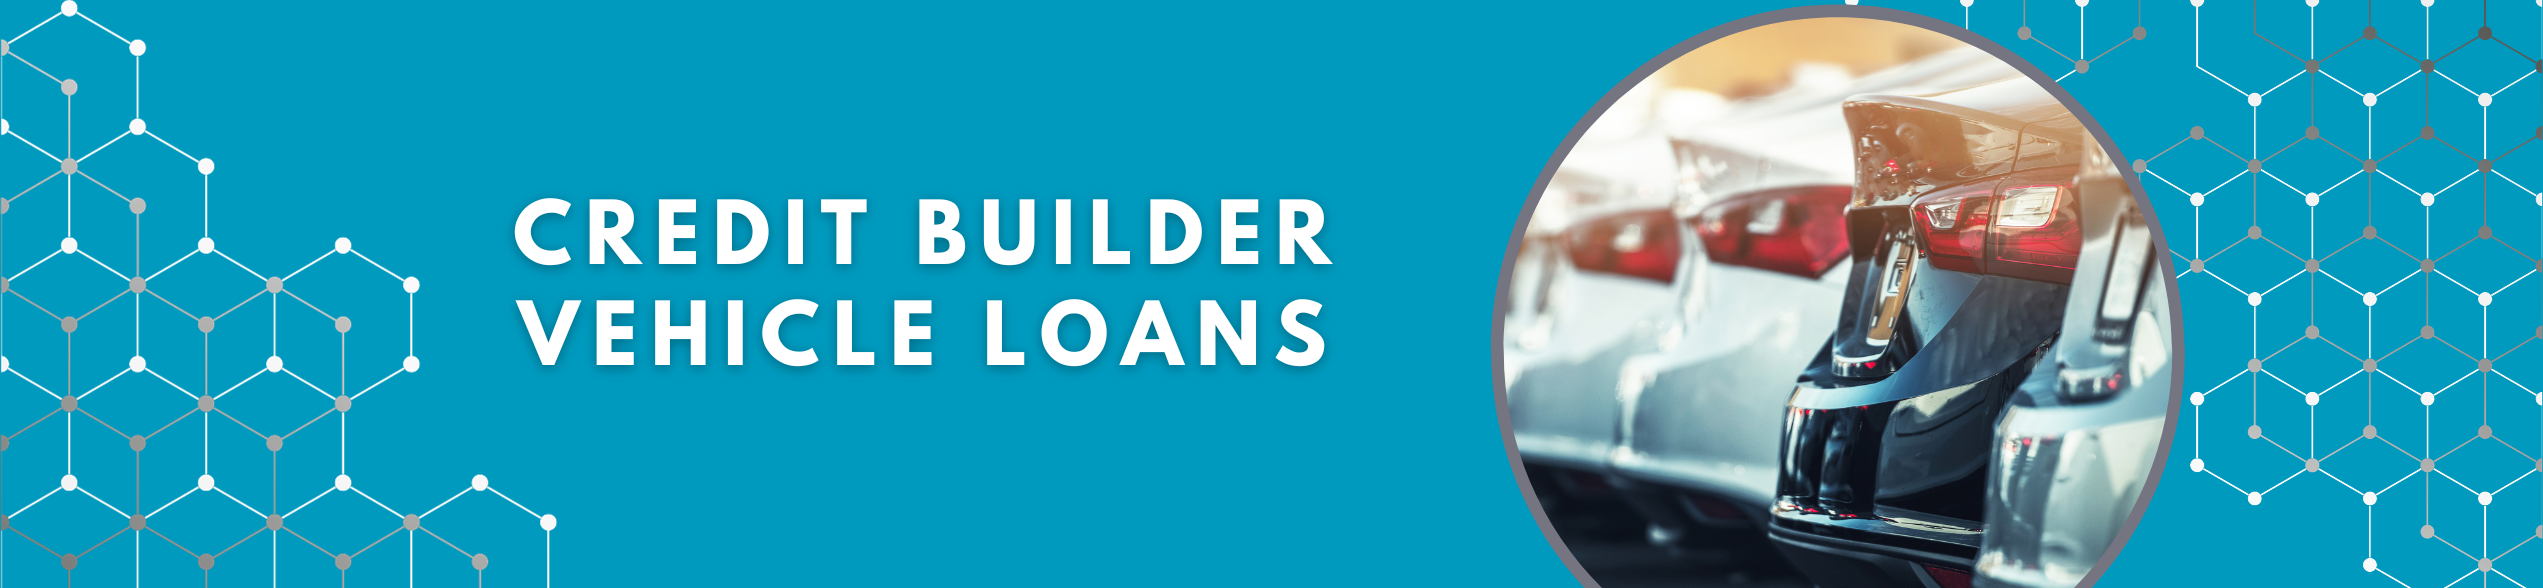 CAFCU offers credit builder vehicle loans